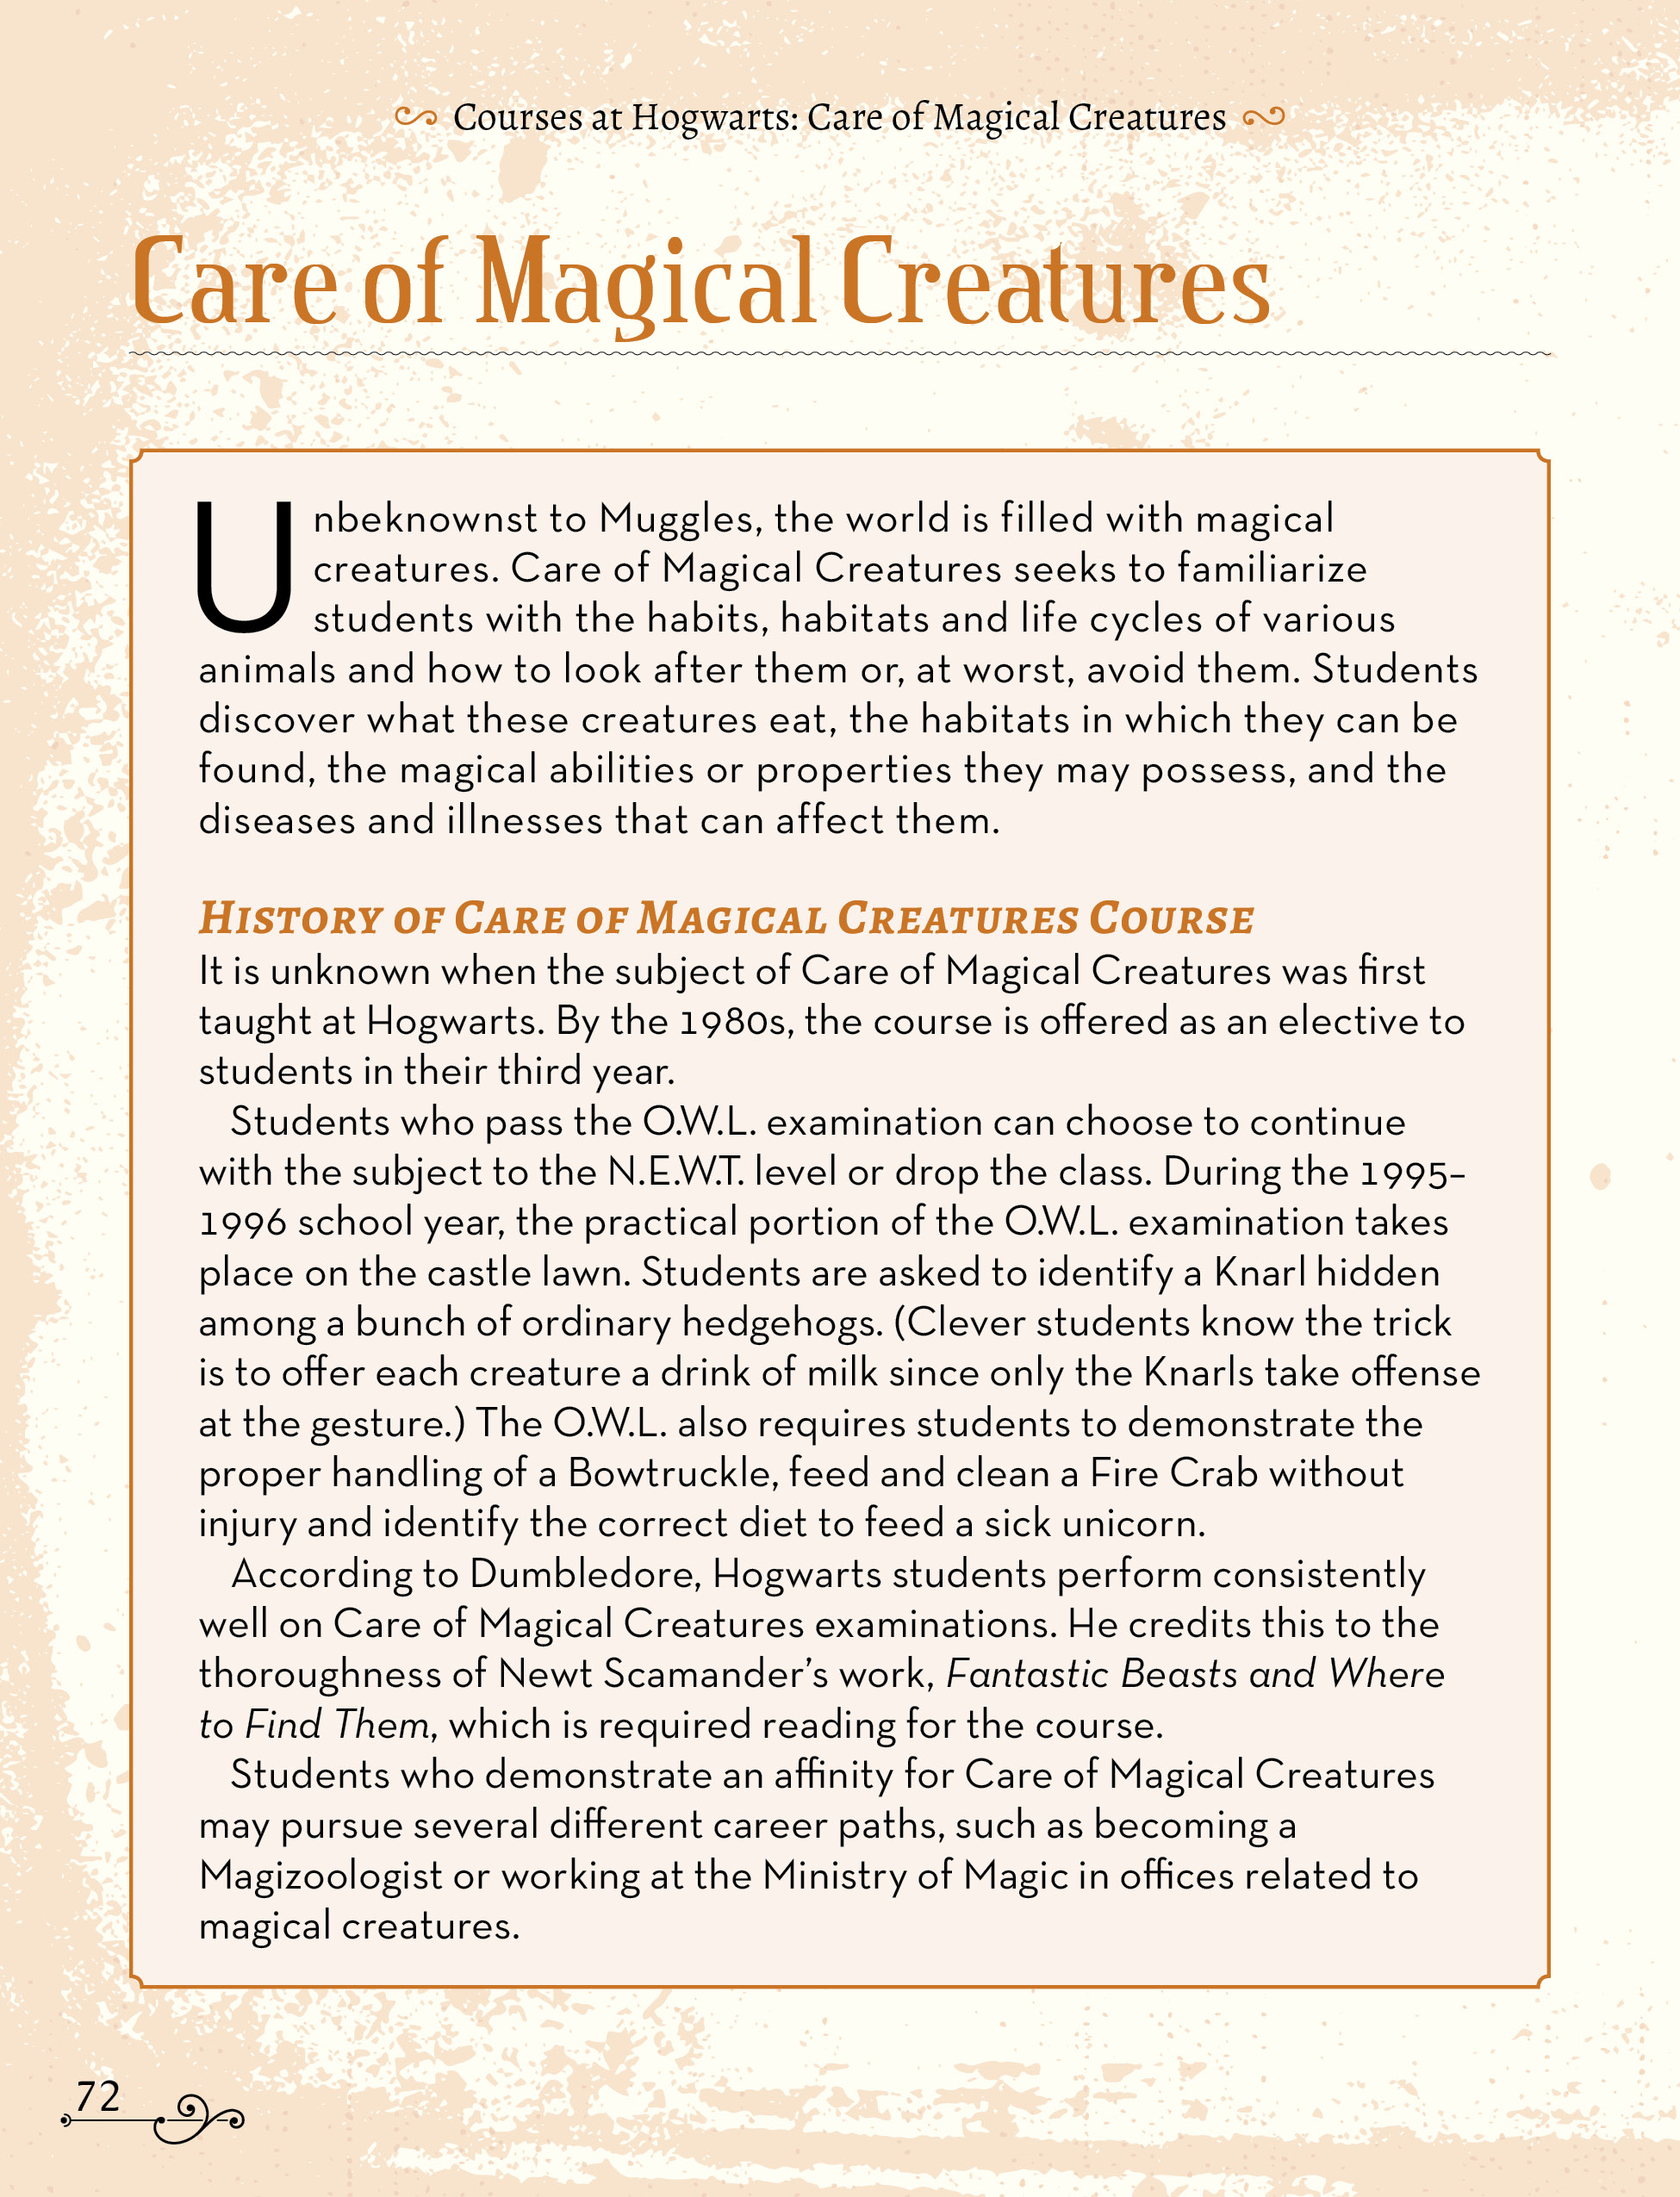 Care of Magical Creatures page from “The Ultimate Wizarding World Guide to Magical Studies”